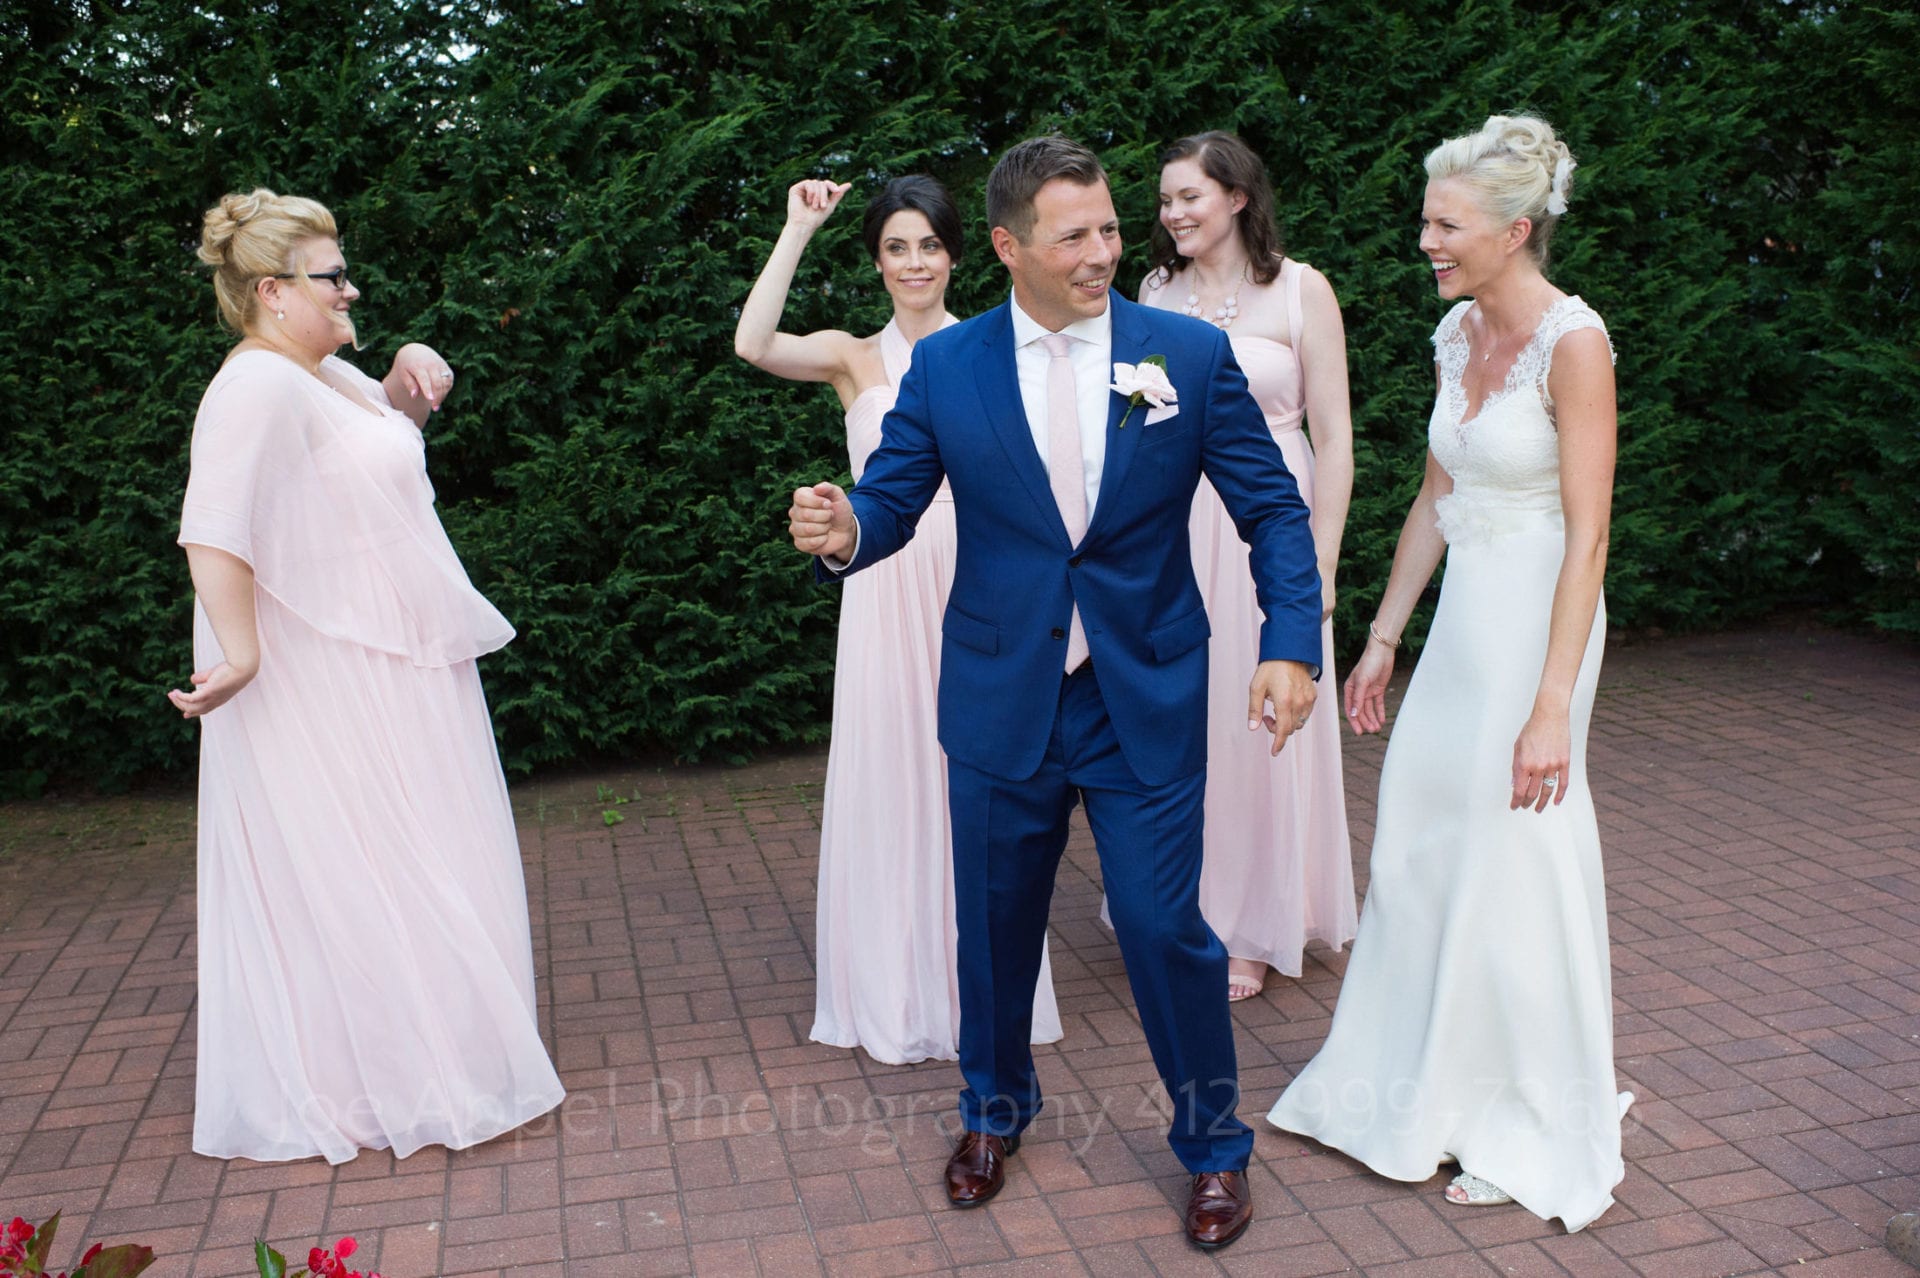 A groom shows off his dance moves as he stands in front of his bride and her bridesmaids during their Omni Bedford Springs Resort Wedding. The bride stands at right laughing.